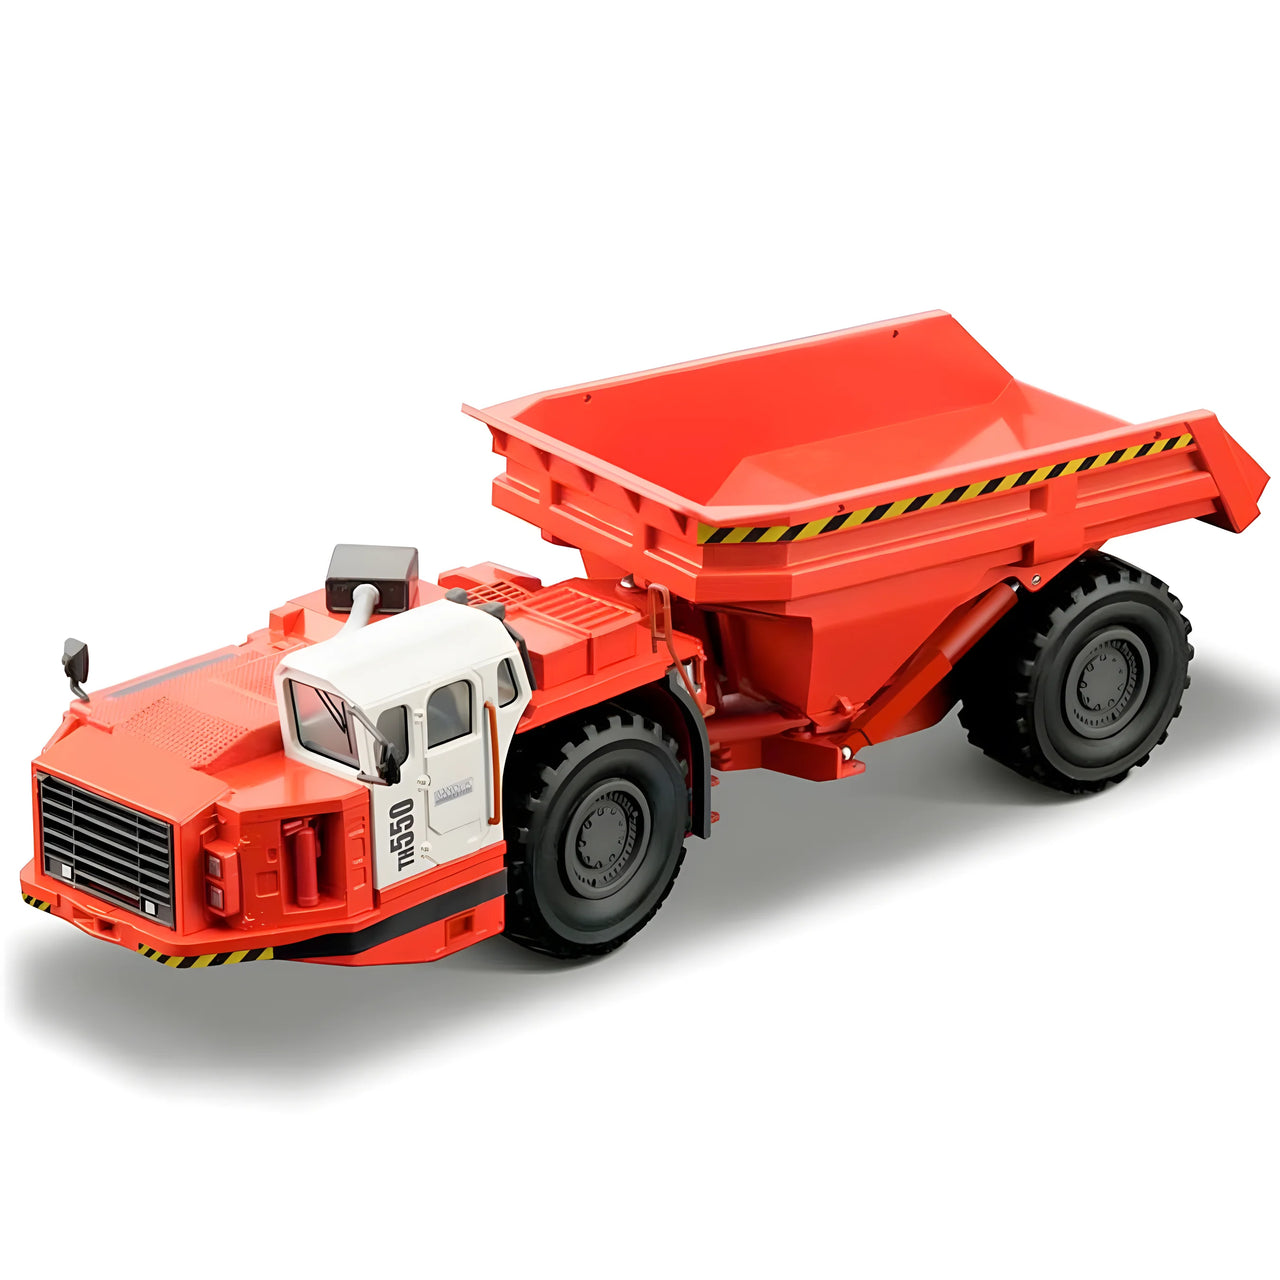 2729-01 Sandvik TH550 Low Profile Mining Truck 1:50 Scale (Discontinued Model)